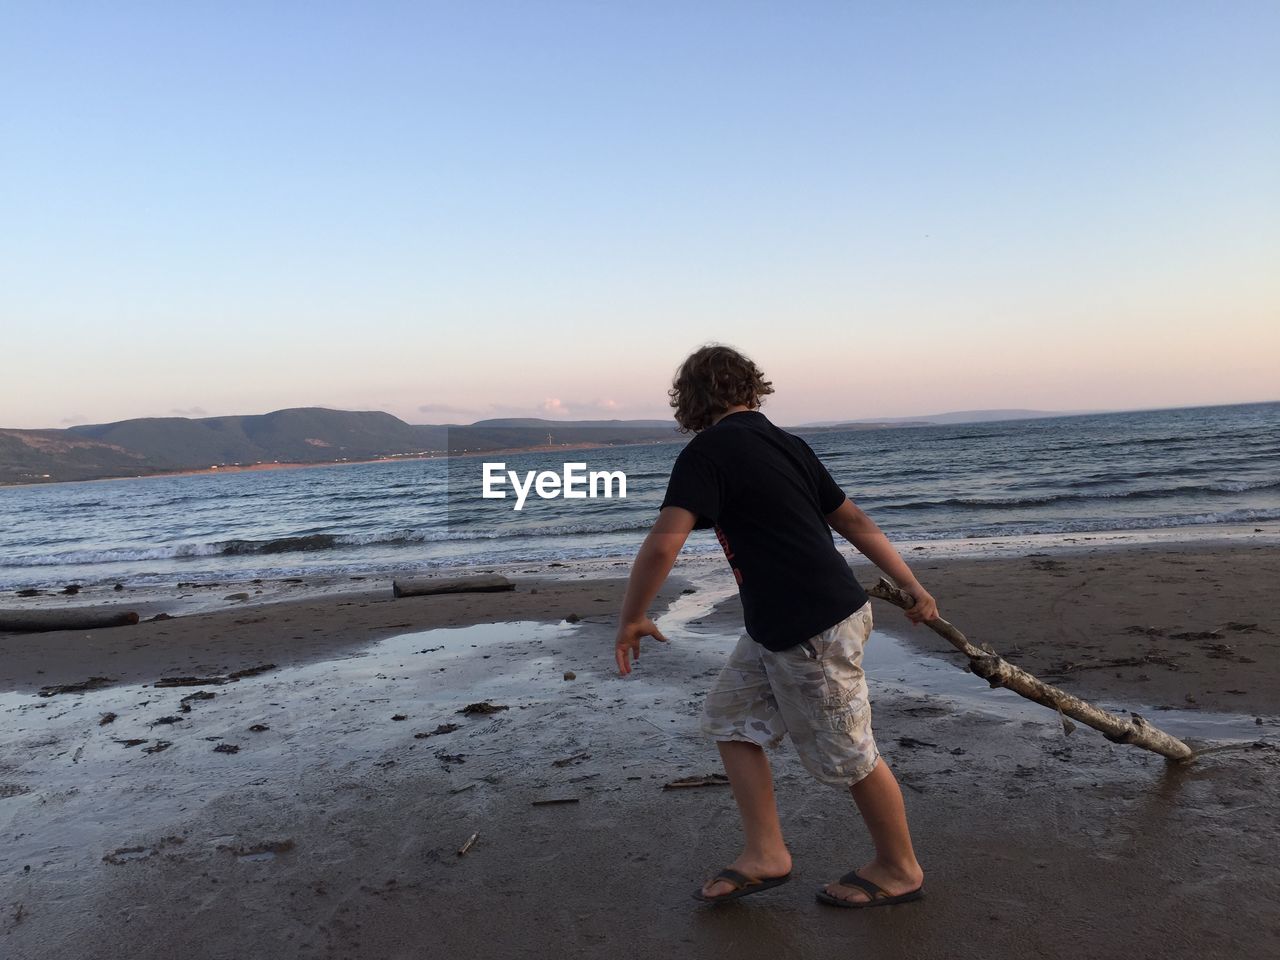 Boy holding driftwood while standing on beach against clear sky